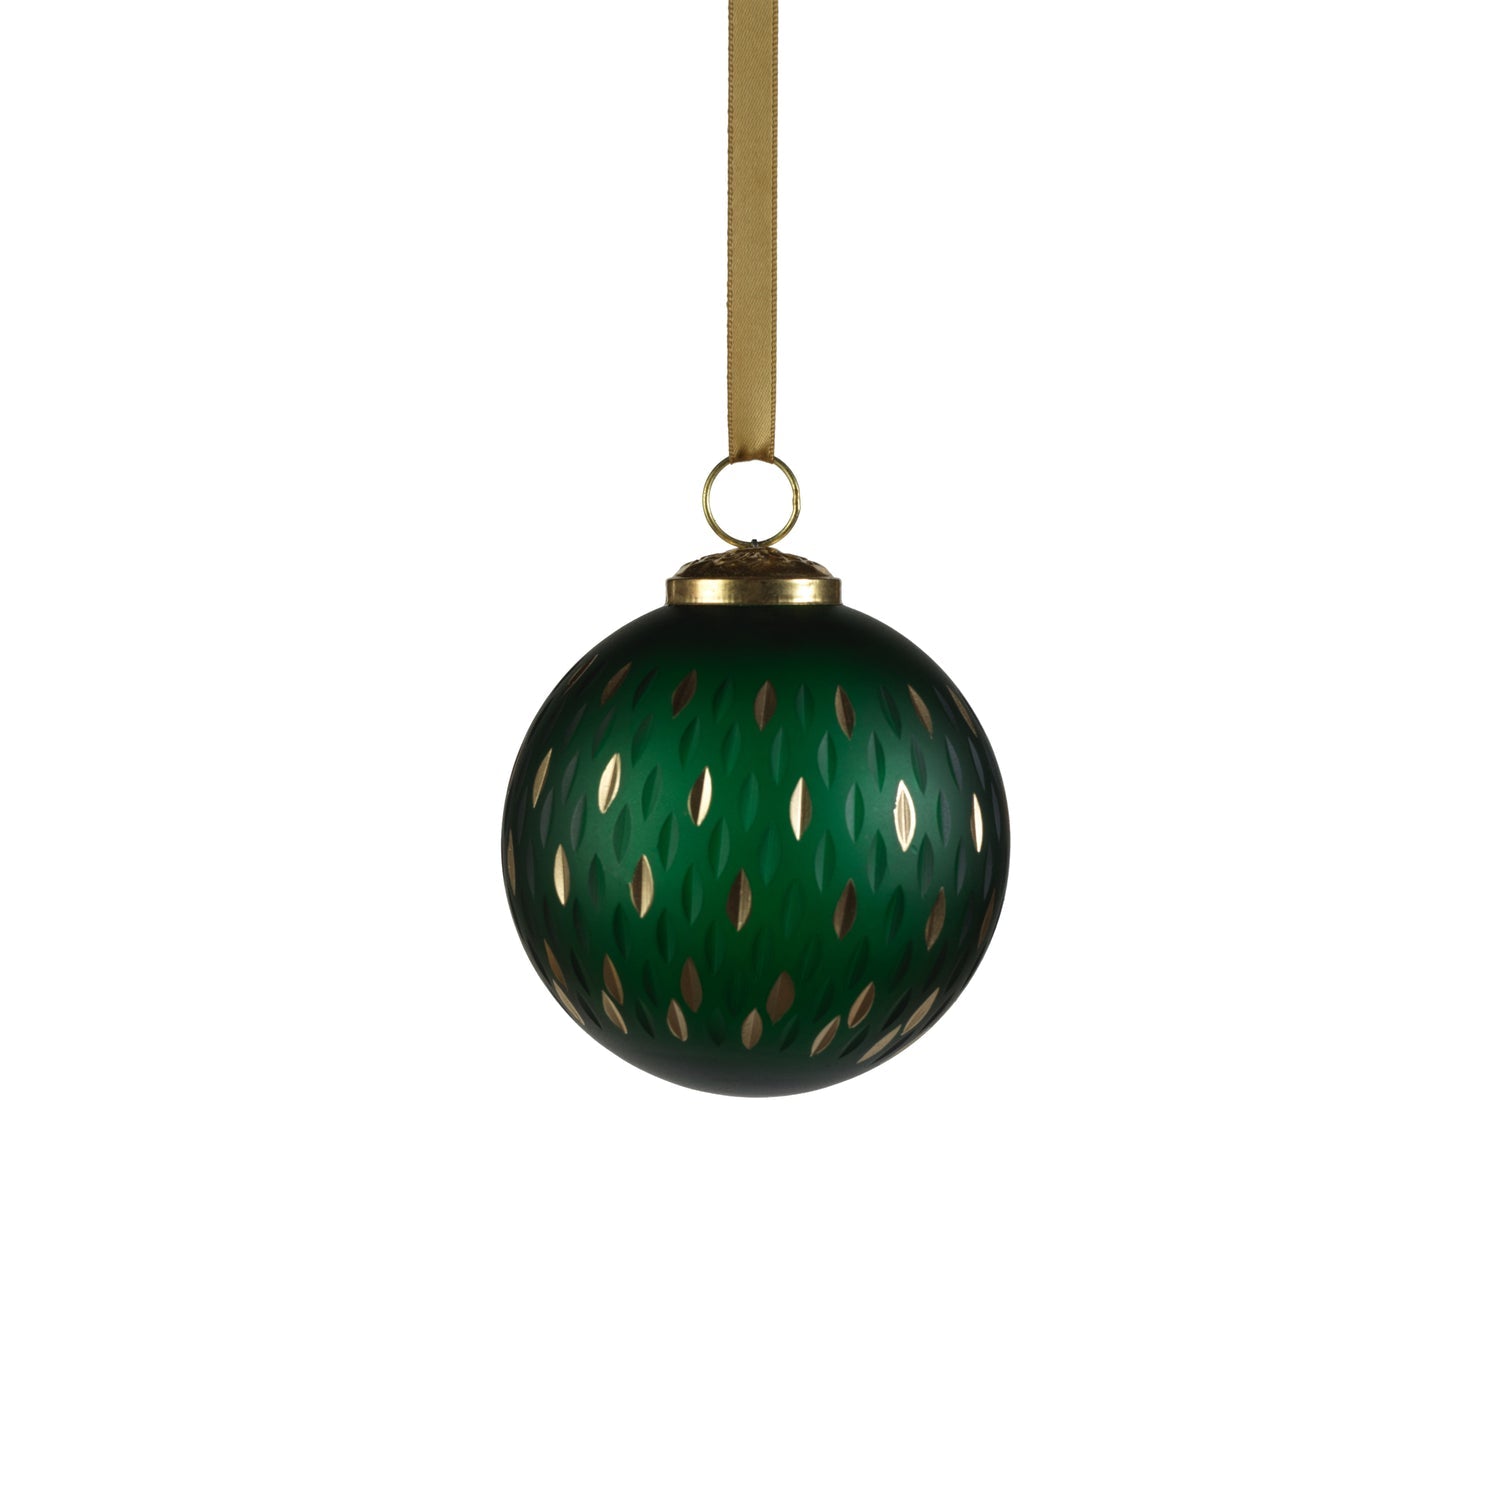 Frosted & Etched in Gold Glass Ornament - Green